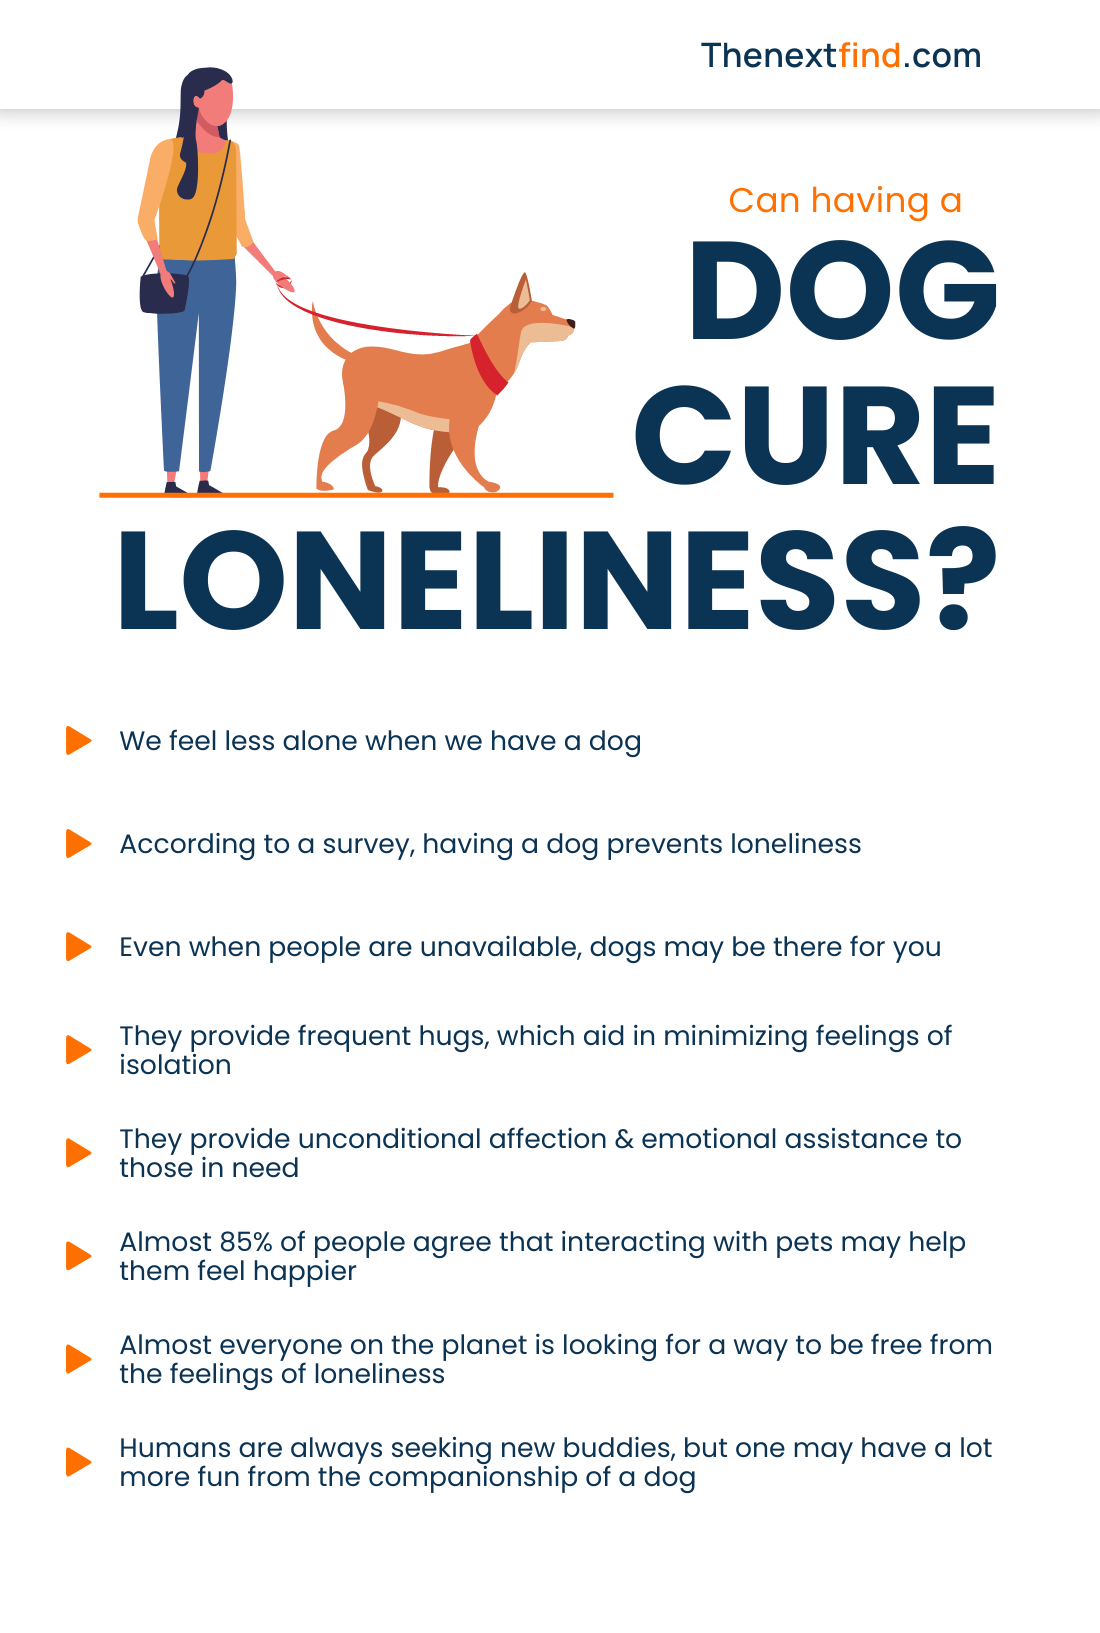 can having dog cure loneliness